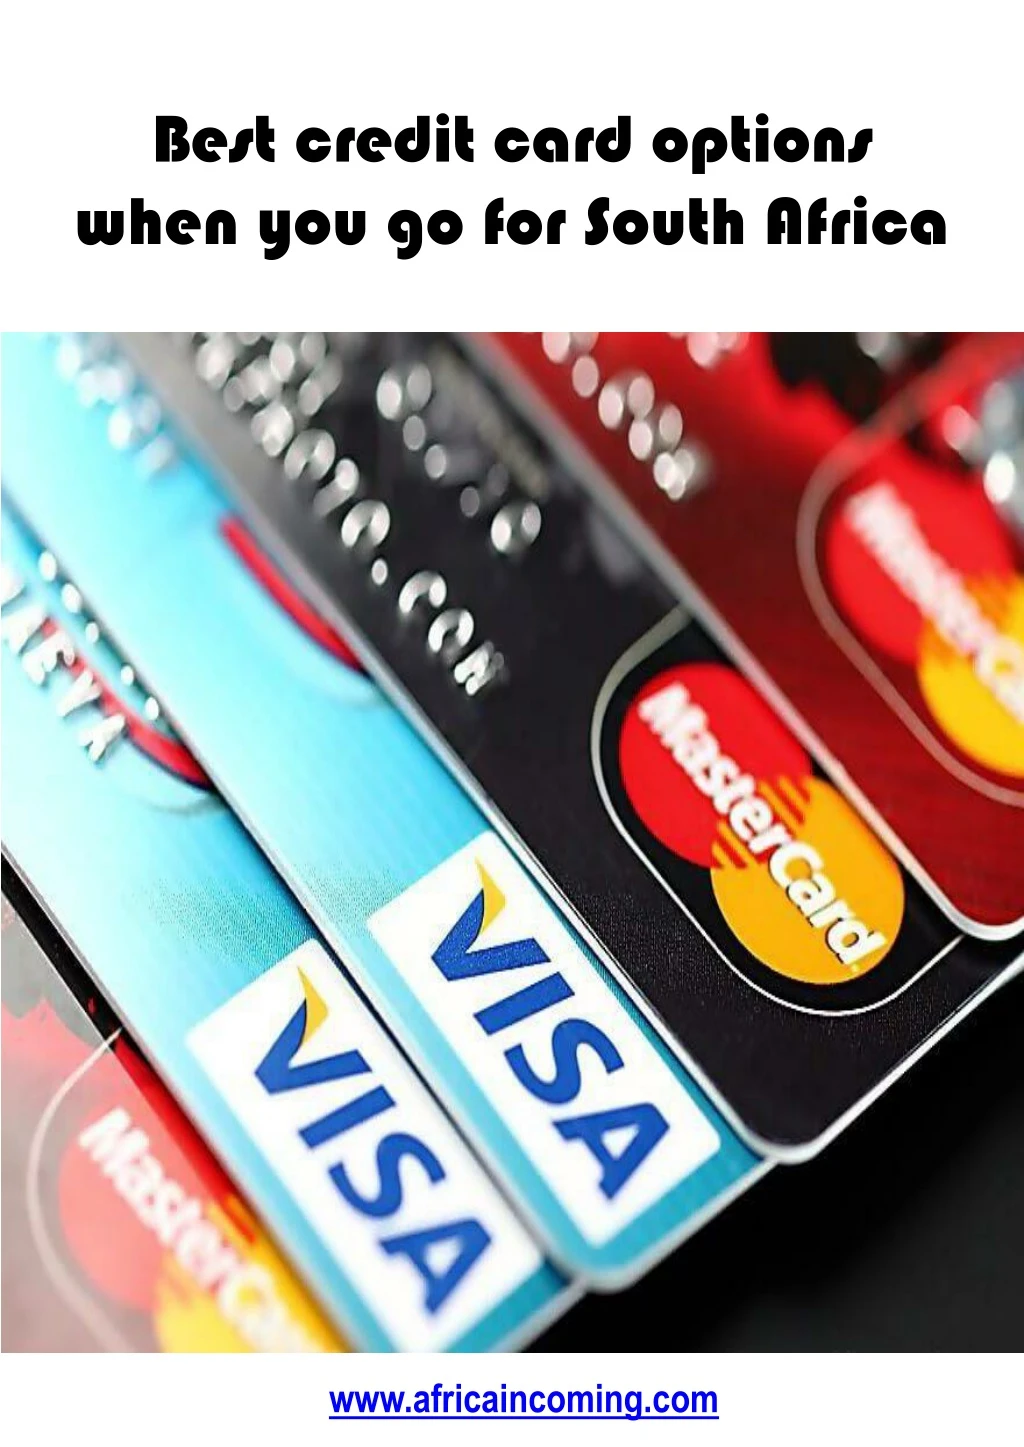 Ppt Best Credit Card Options When You Go For South Africa Powerpoint Presentation Id8499824 5943